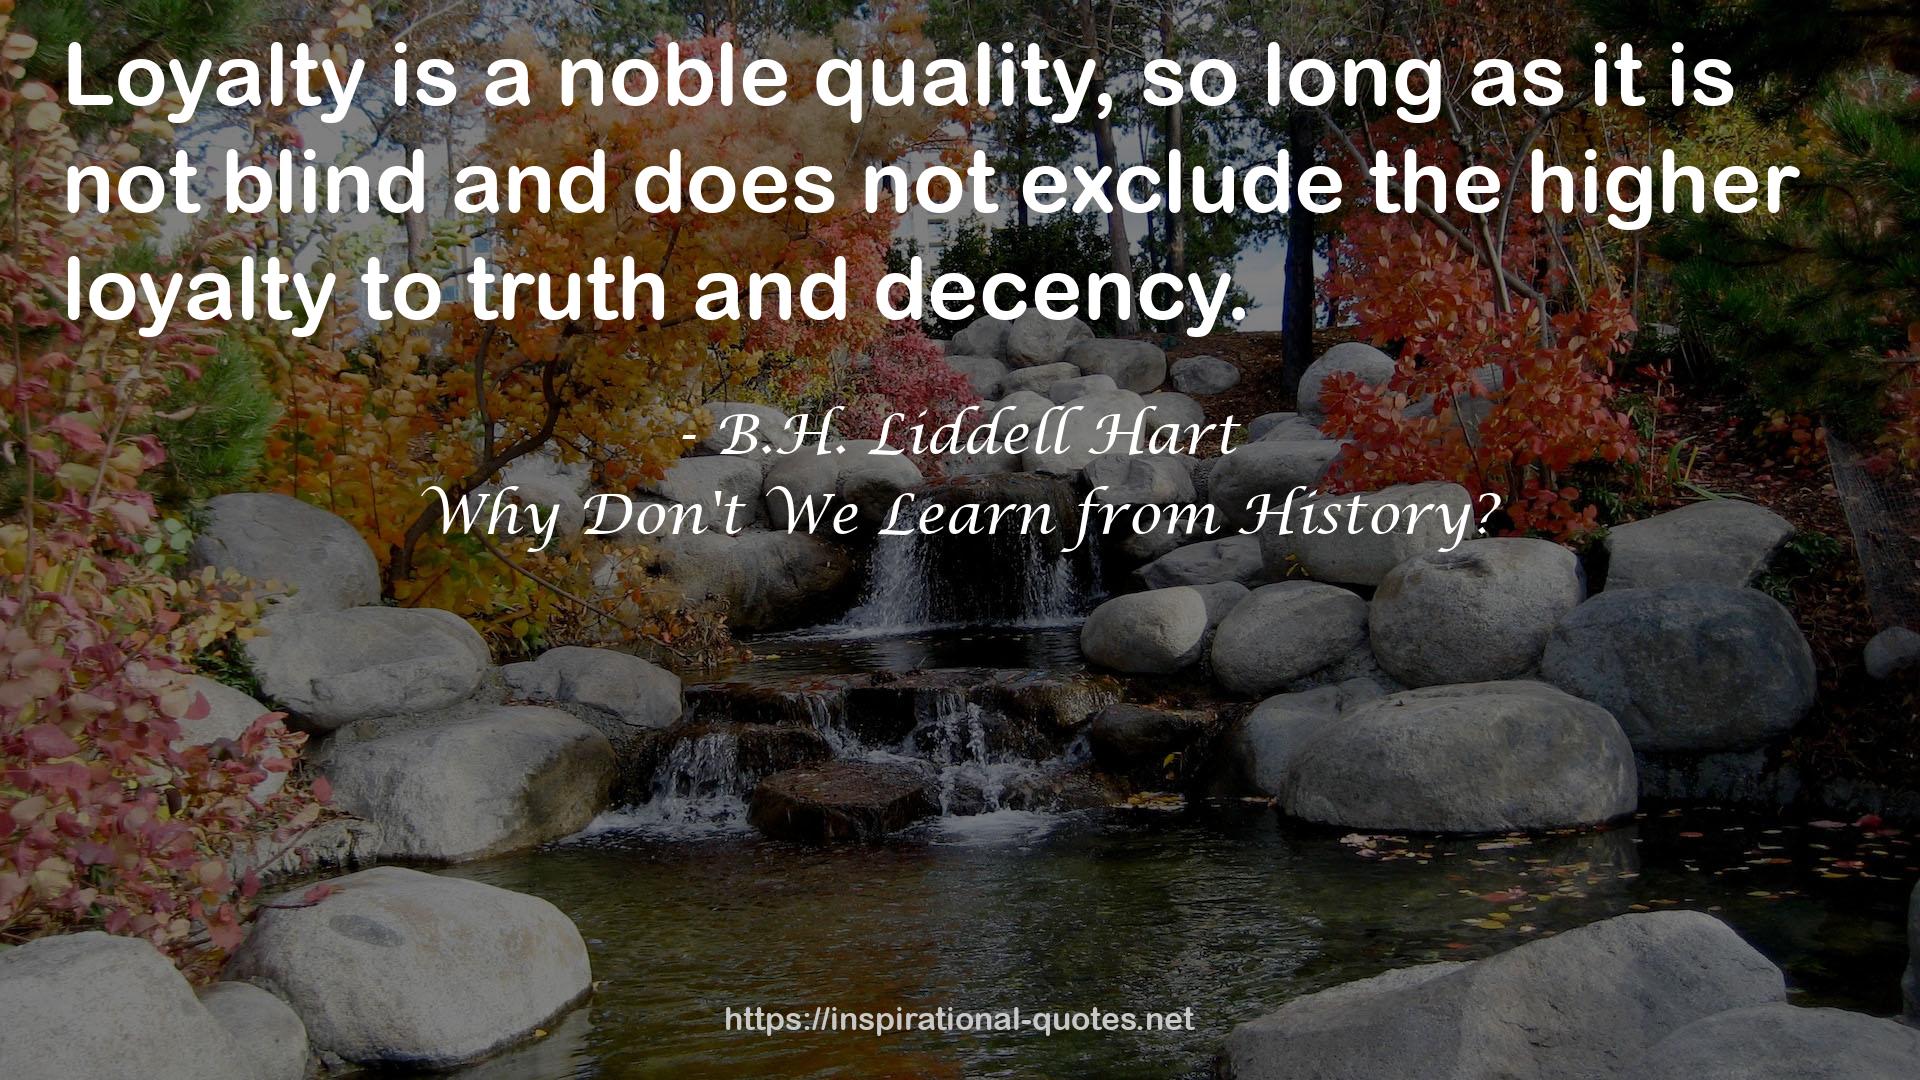 Why Don't We Learn from History? QUOTES